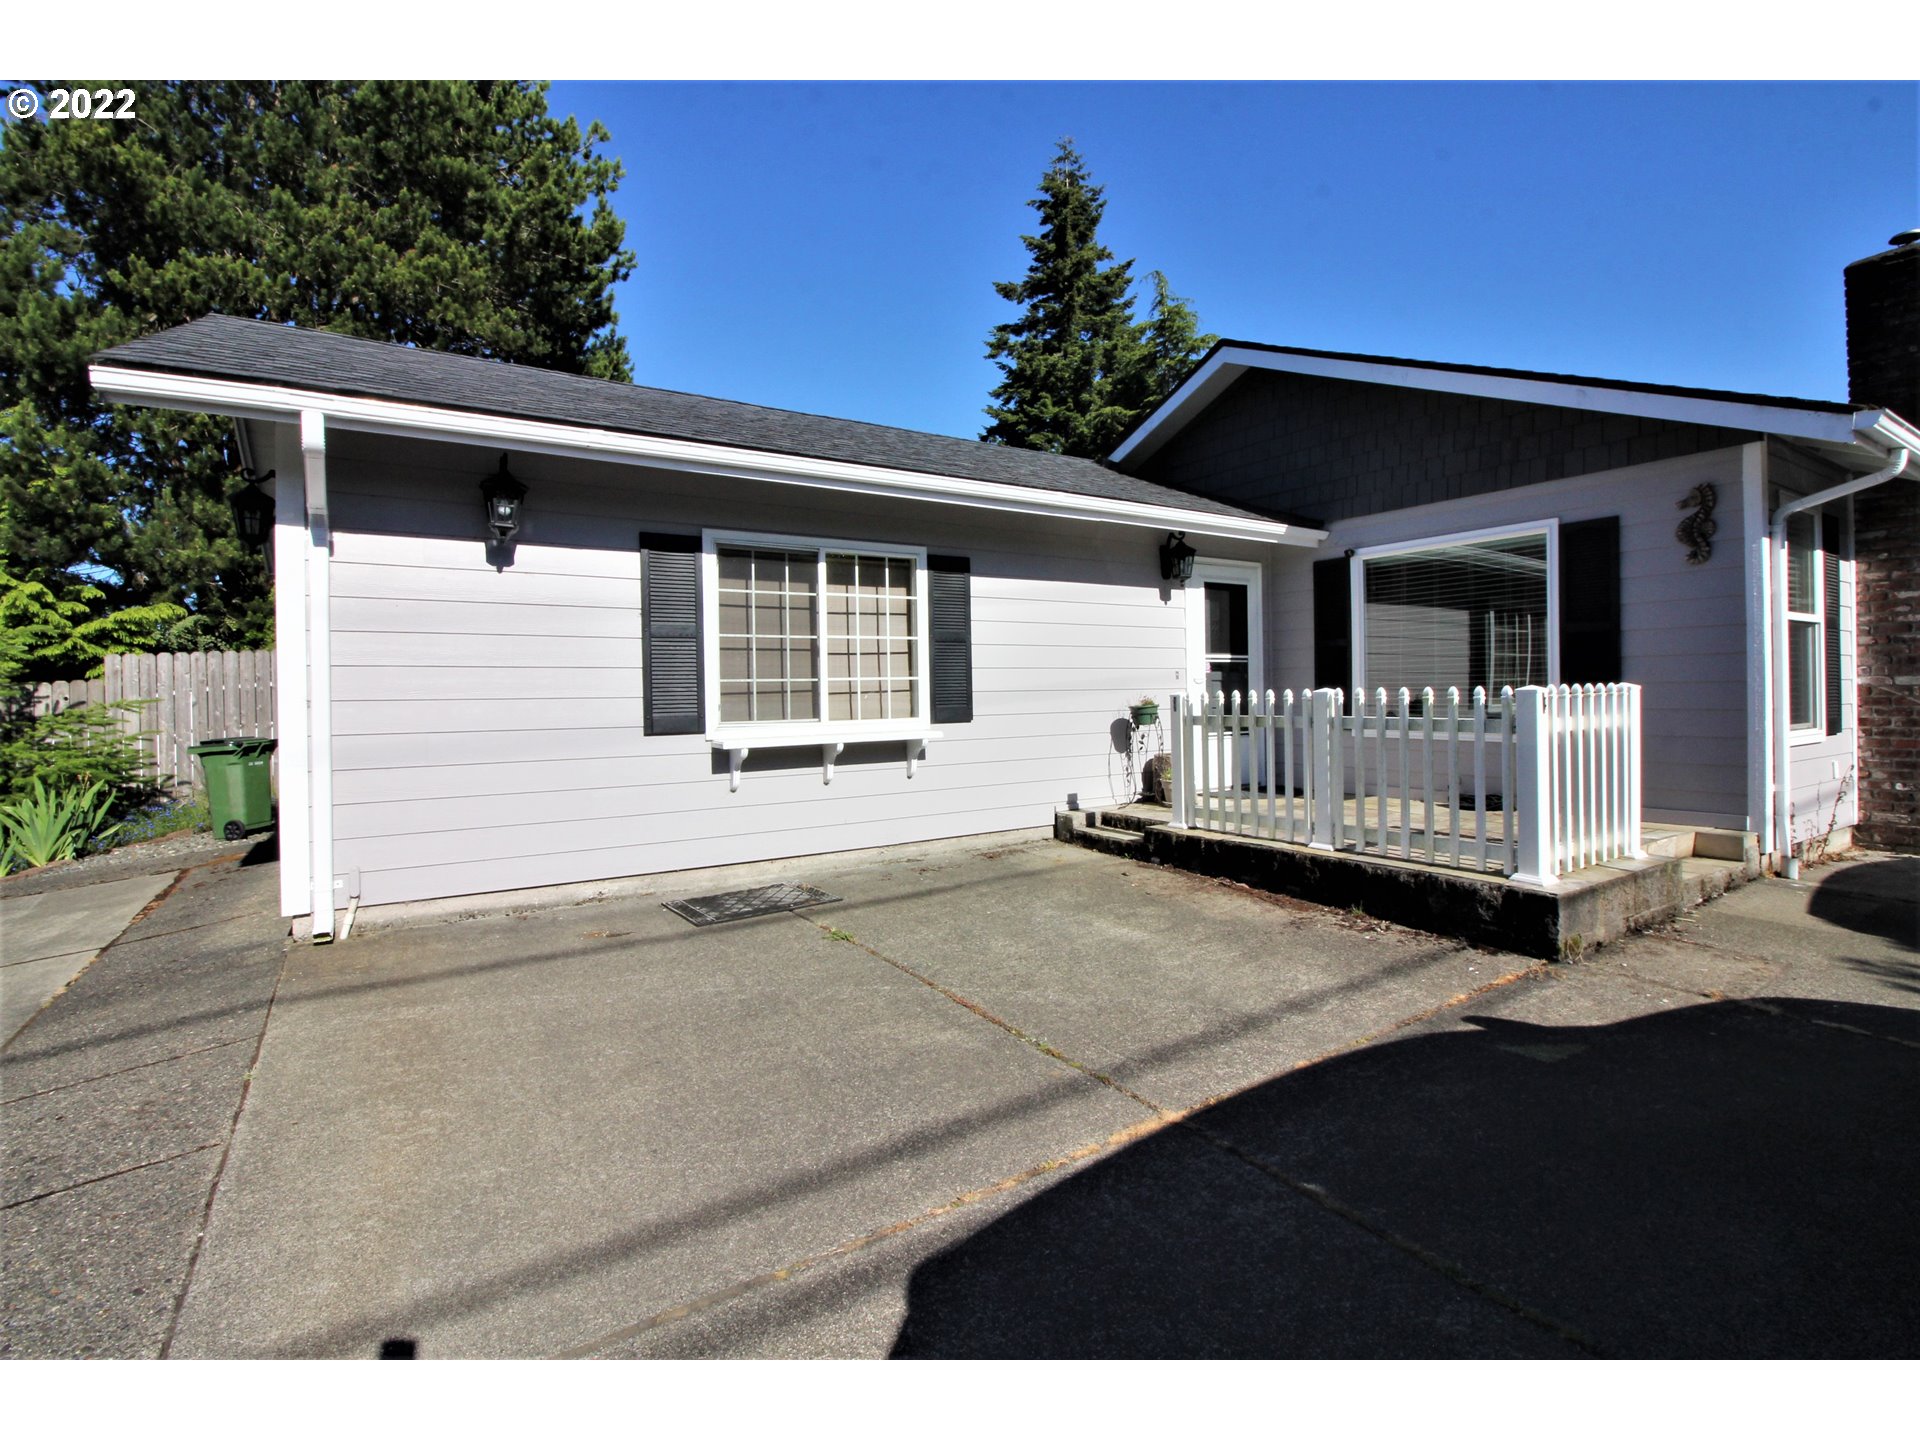 1159 NEWMARK, North Bend, OR 97459